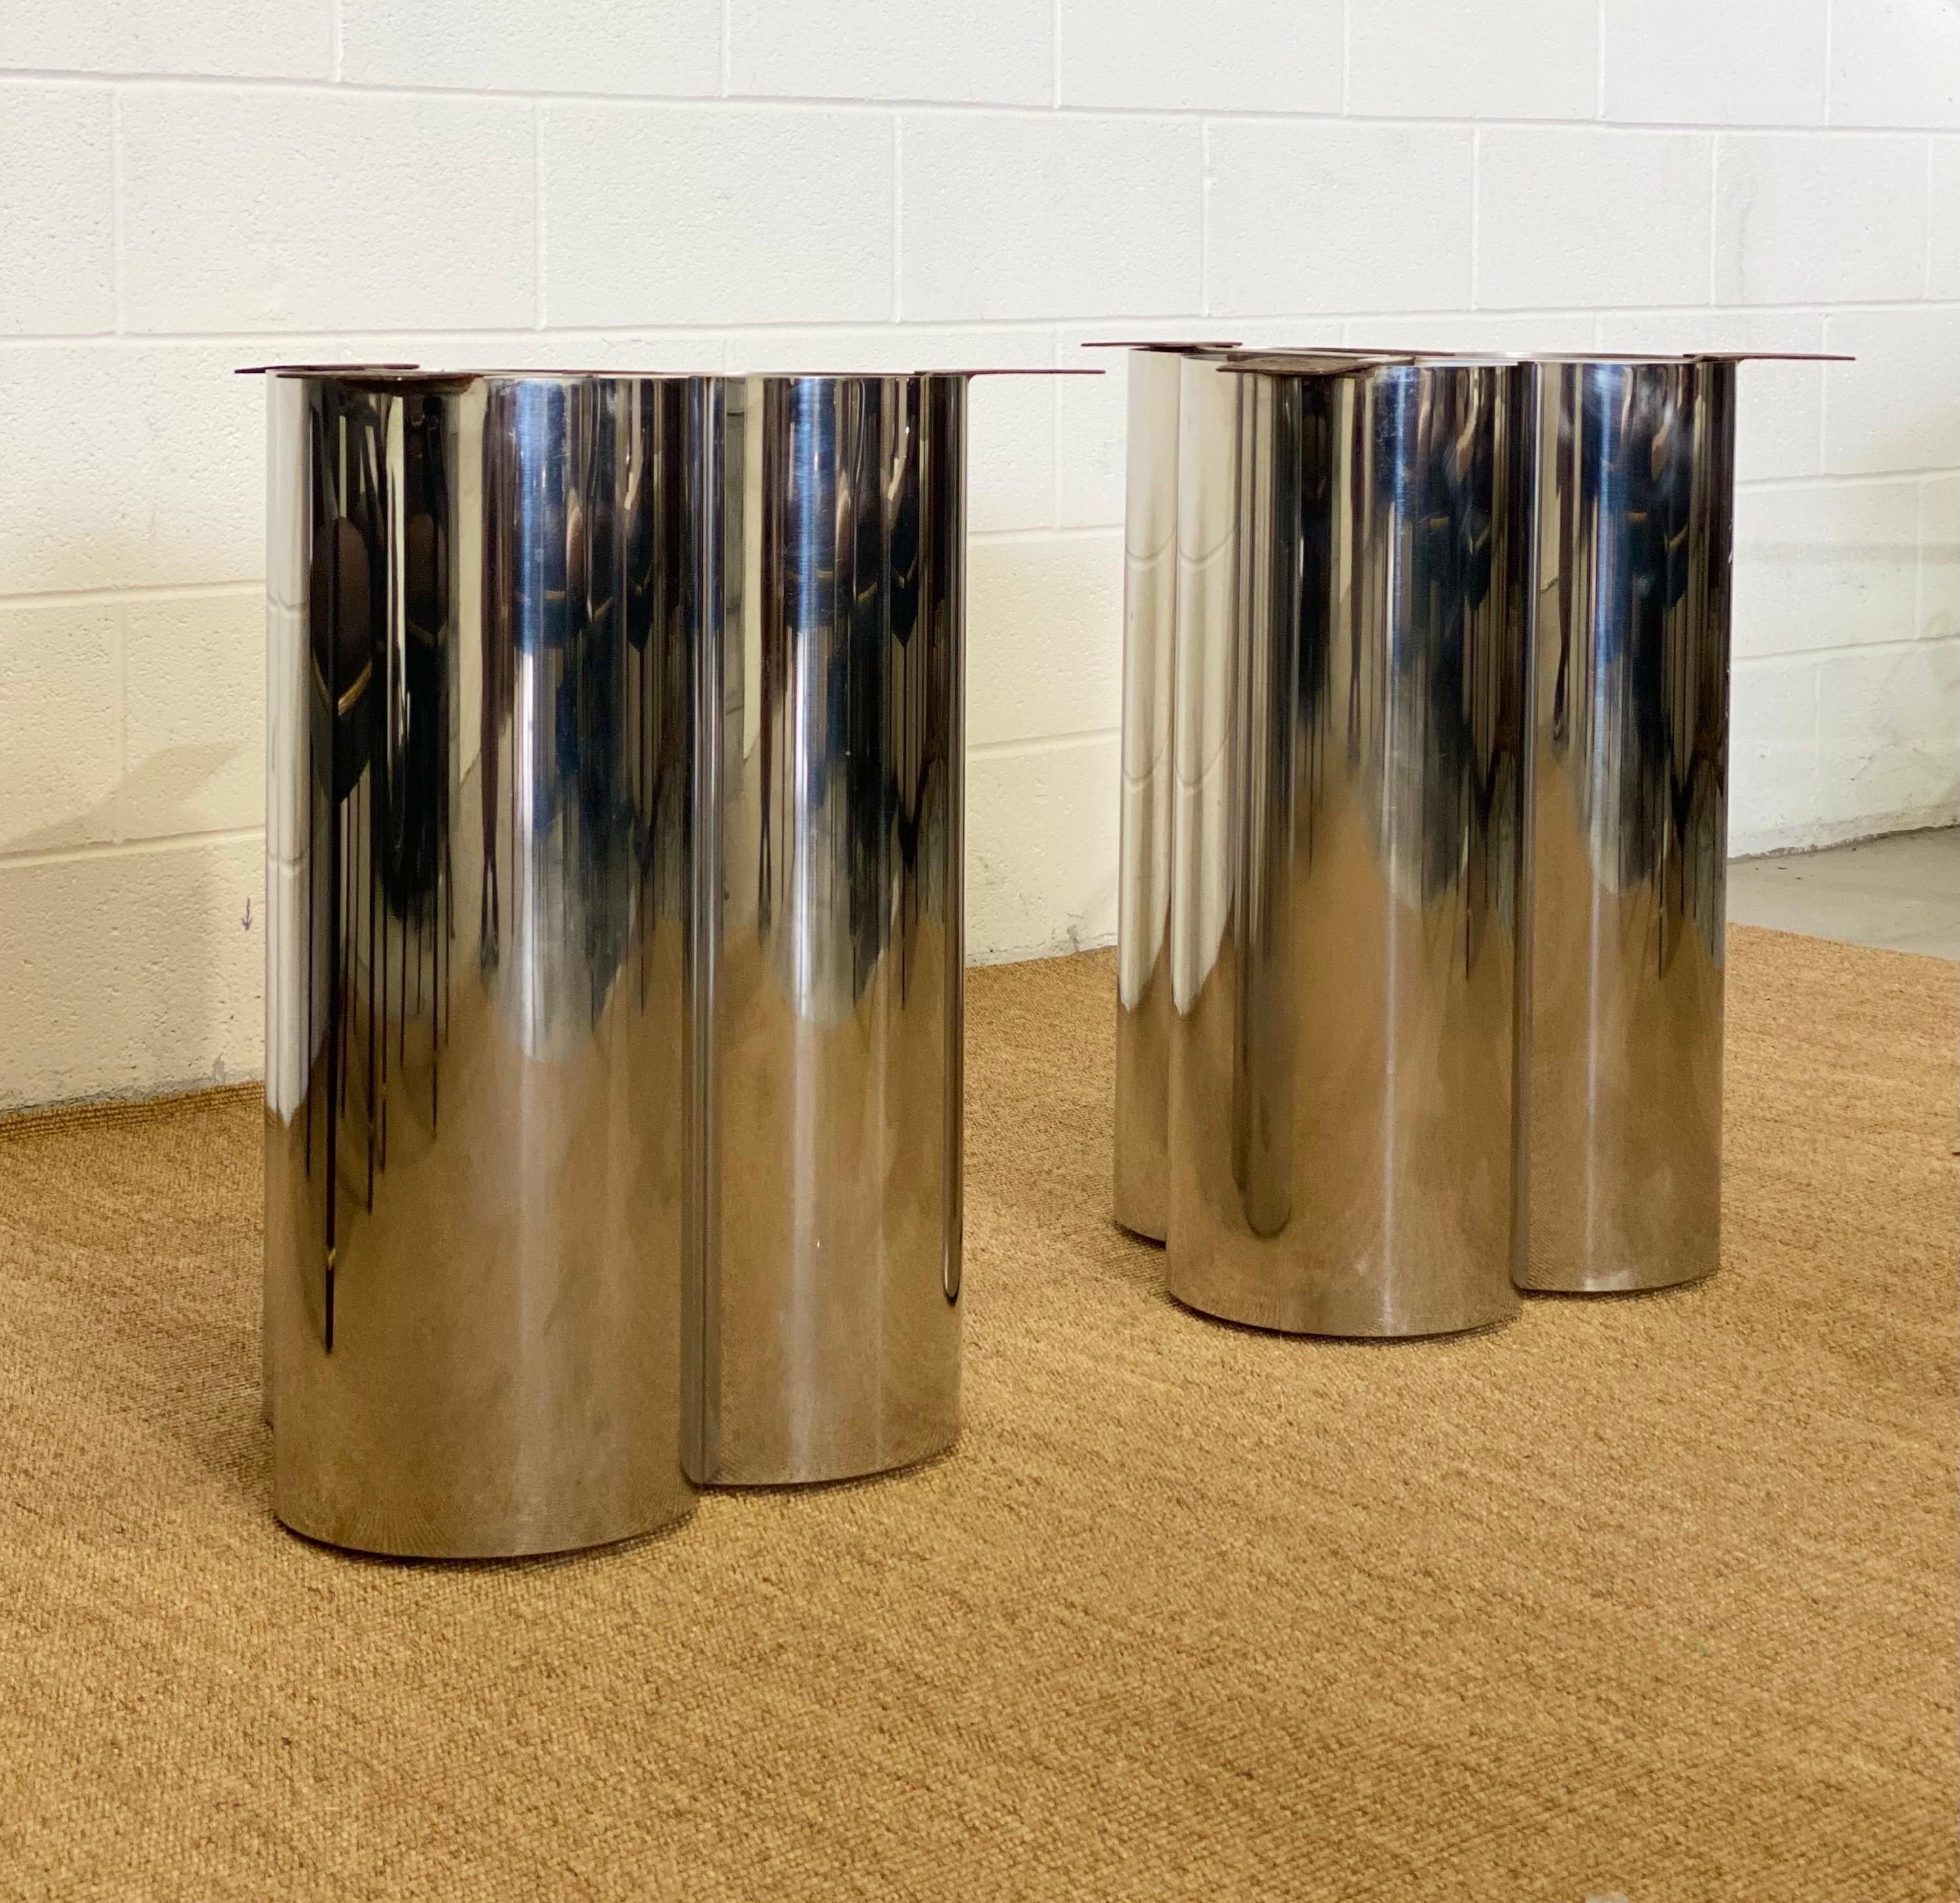 1970s Mastercraft Stainless Steel Table Pedestals – a Pair For Sale 3